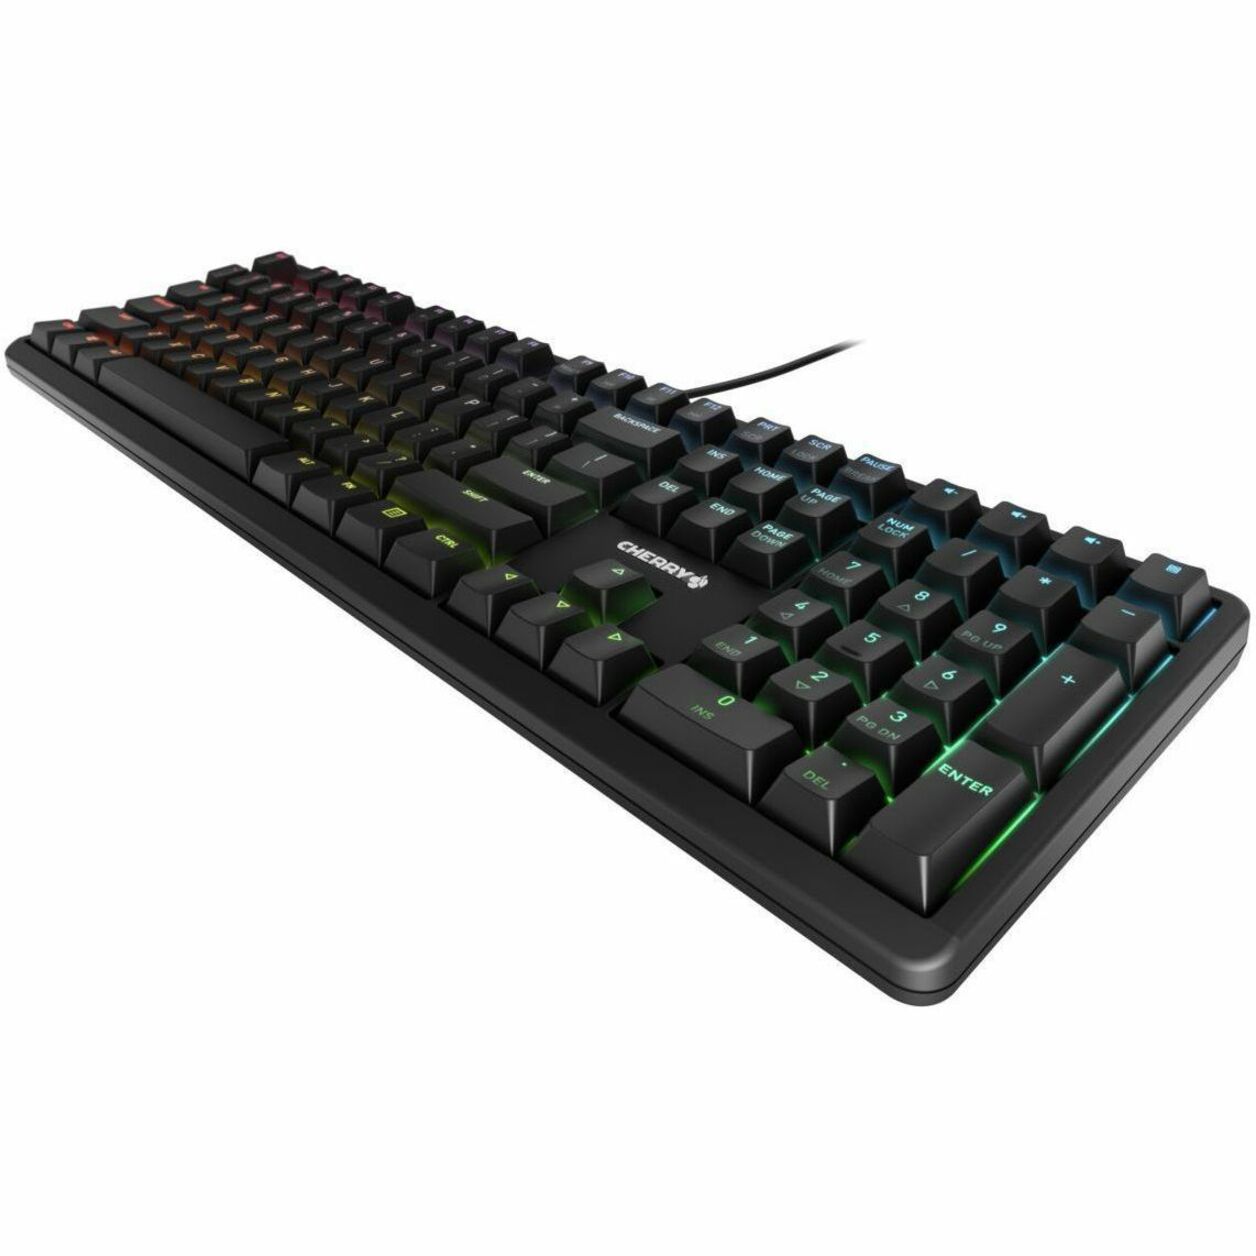 CHERRY G80-3838LWBUS-2 Keyboard, RGB Backlit Mechanical Wired Keyboard with Key Rollover and Anti-Ghosting